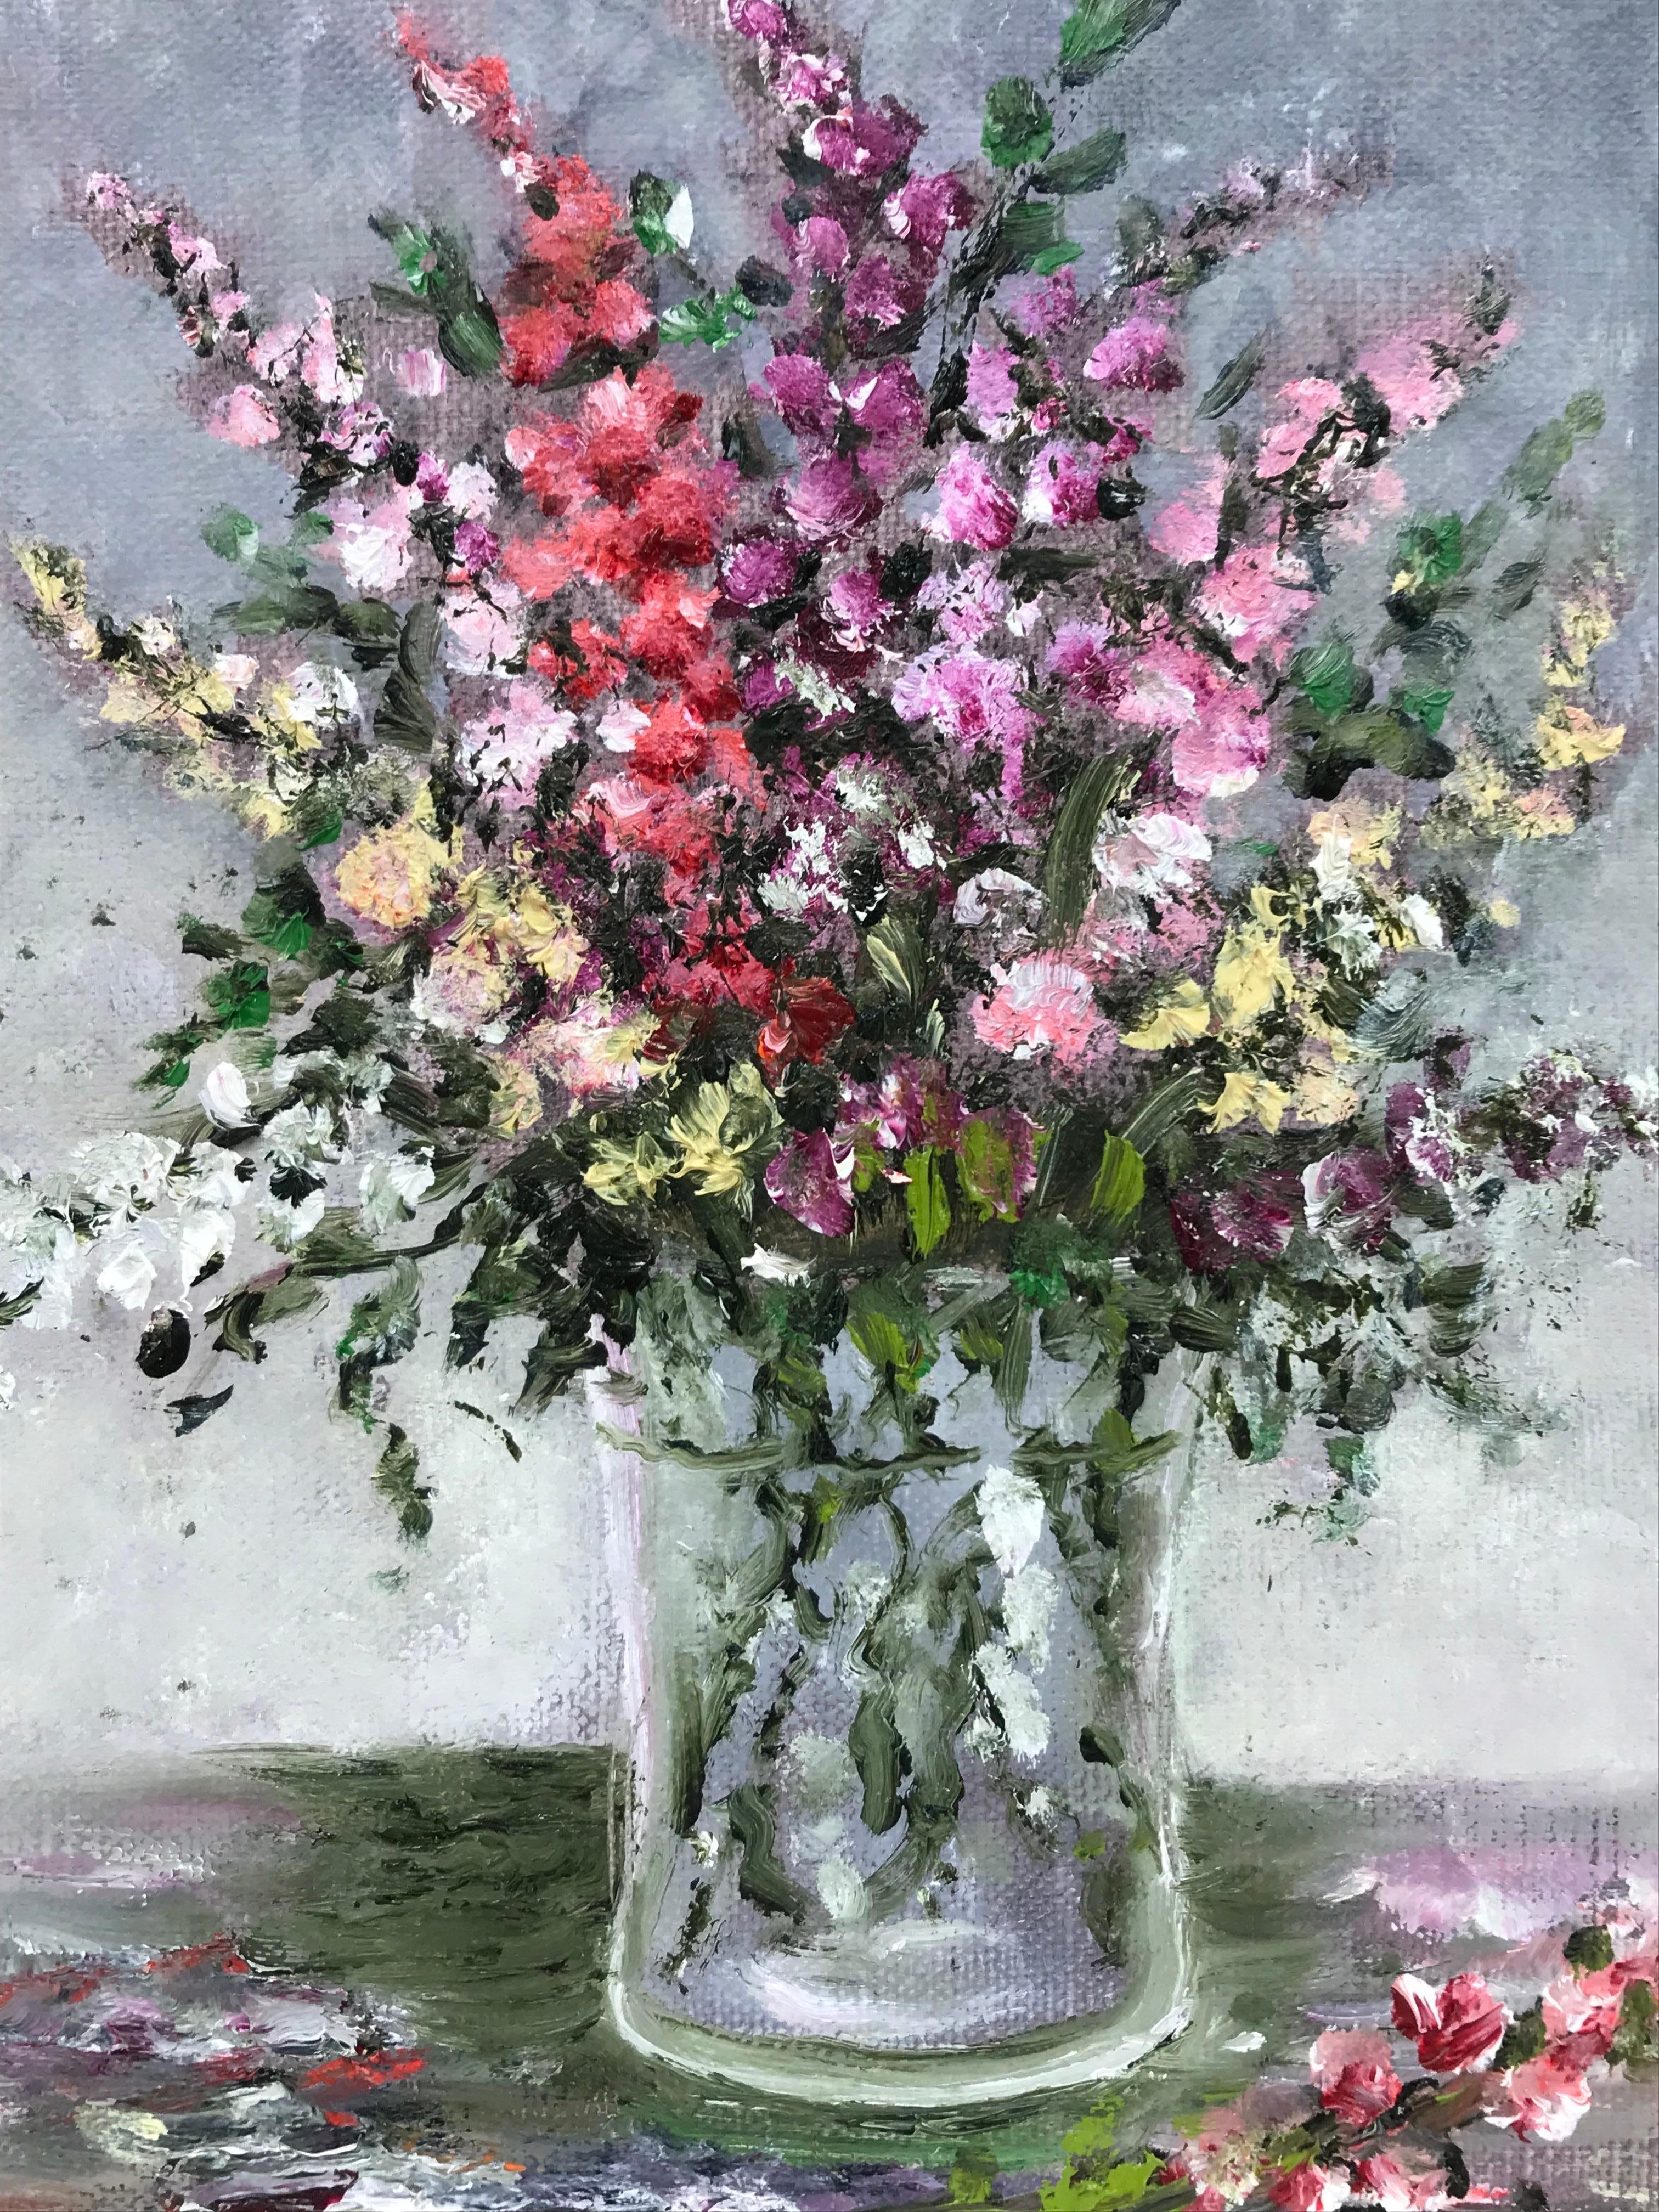 painting flowers on glass